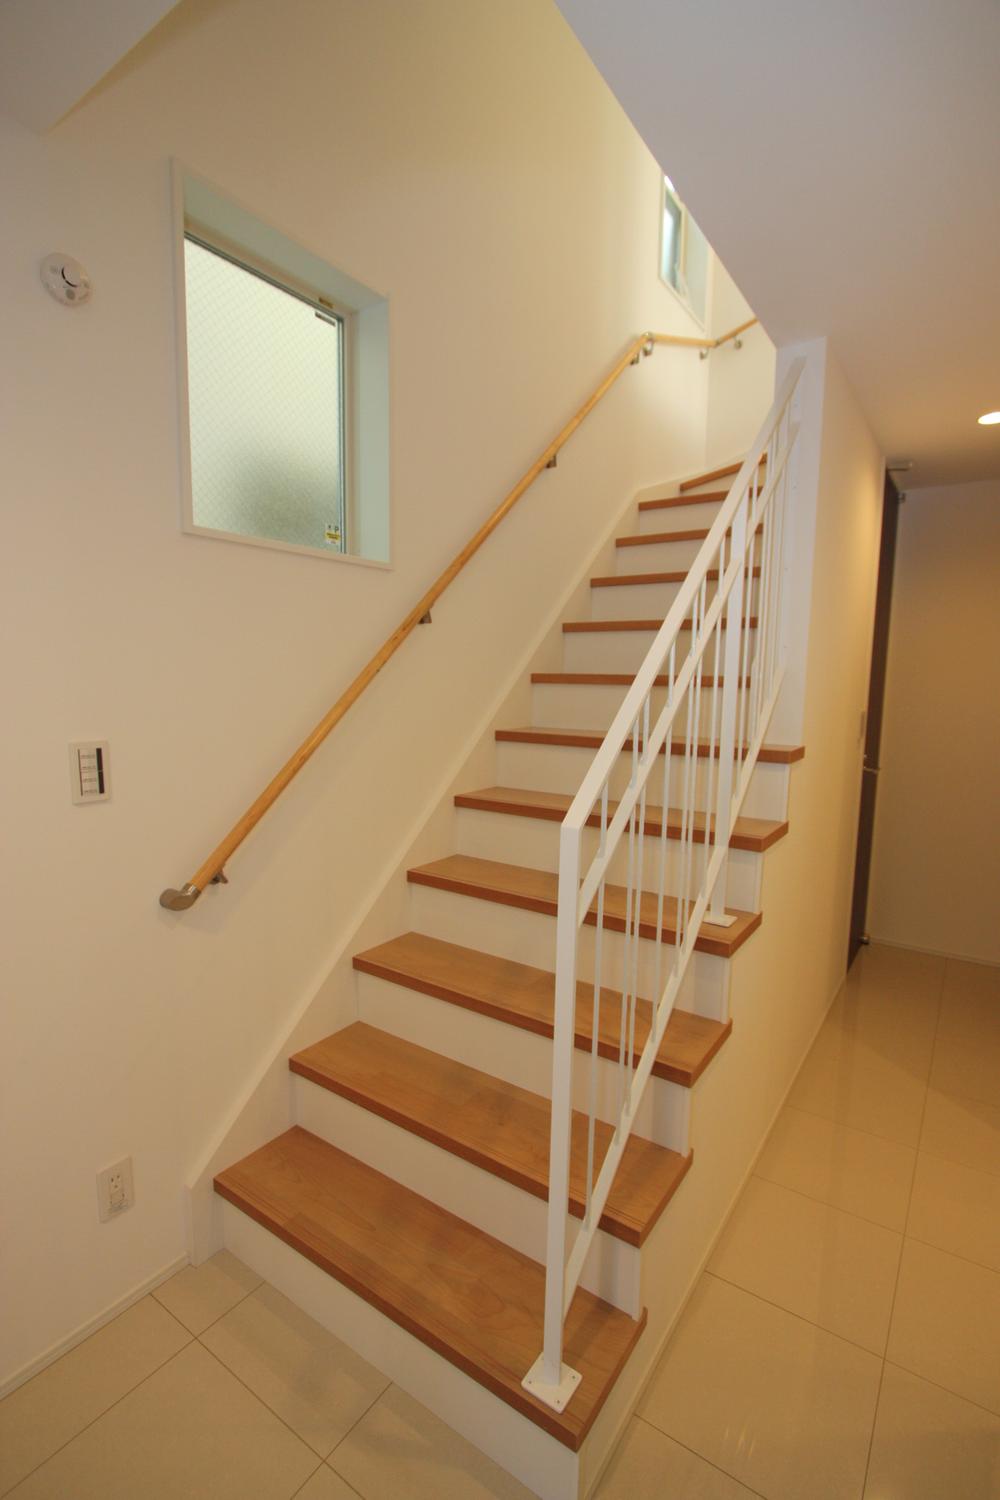 Other. Meter module design of the stairs is a room width